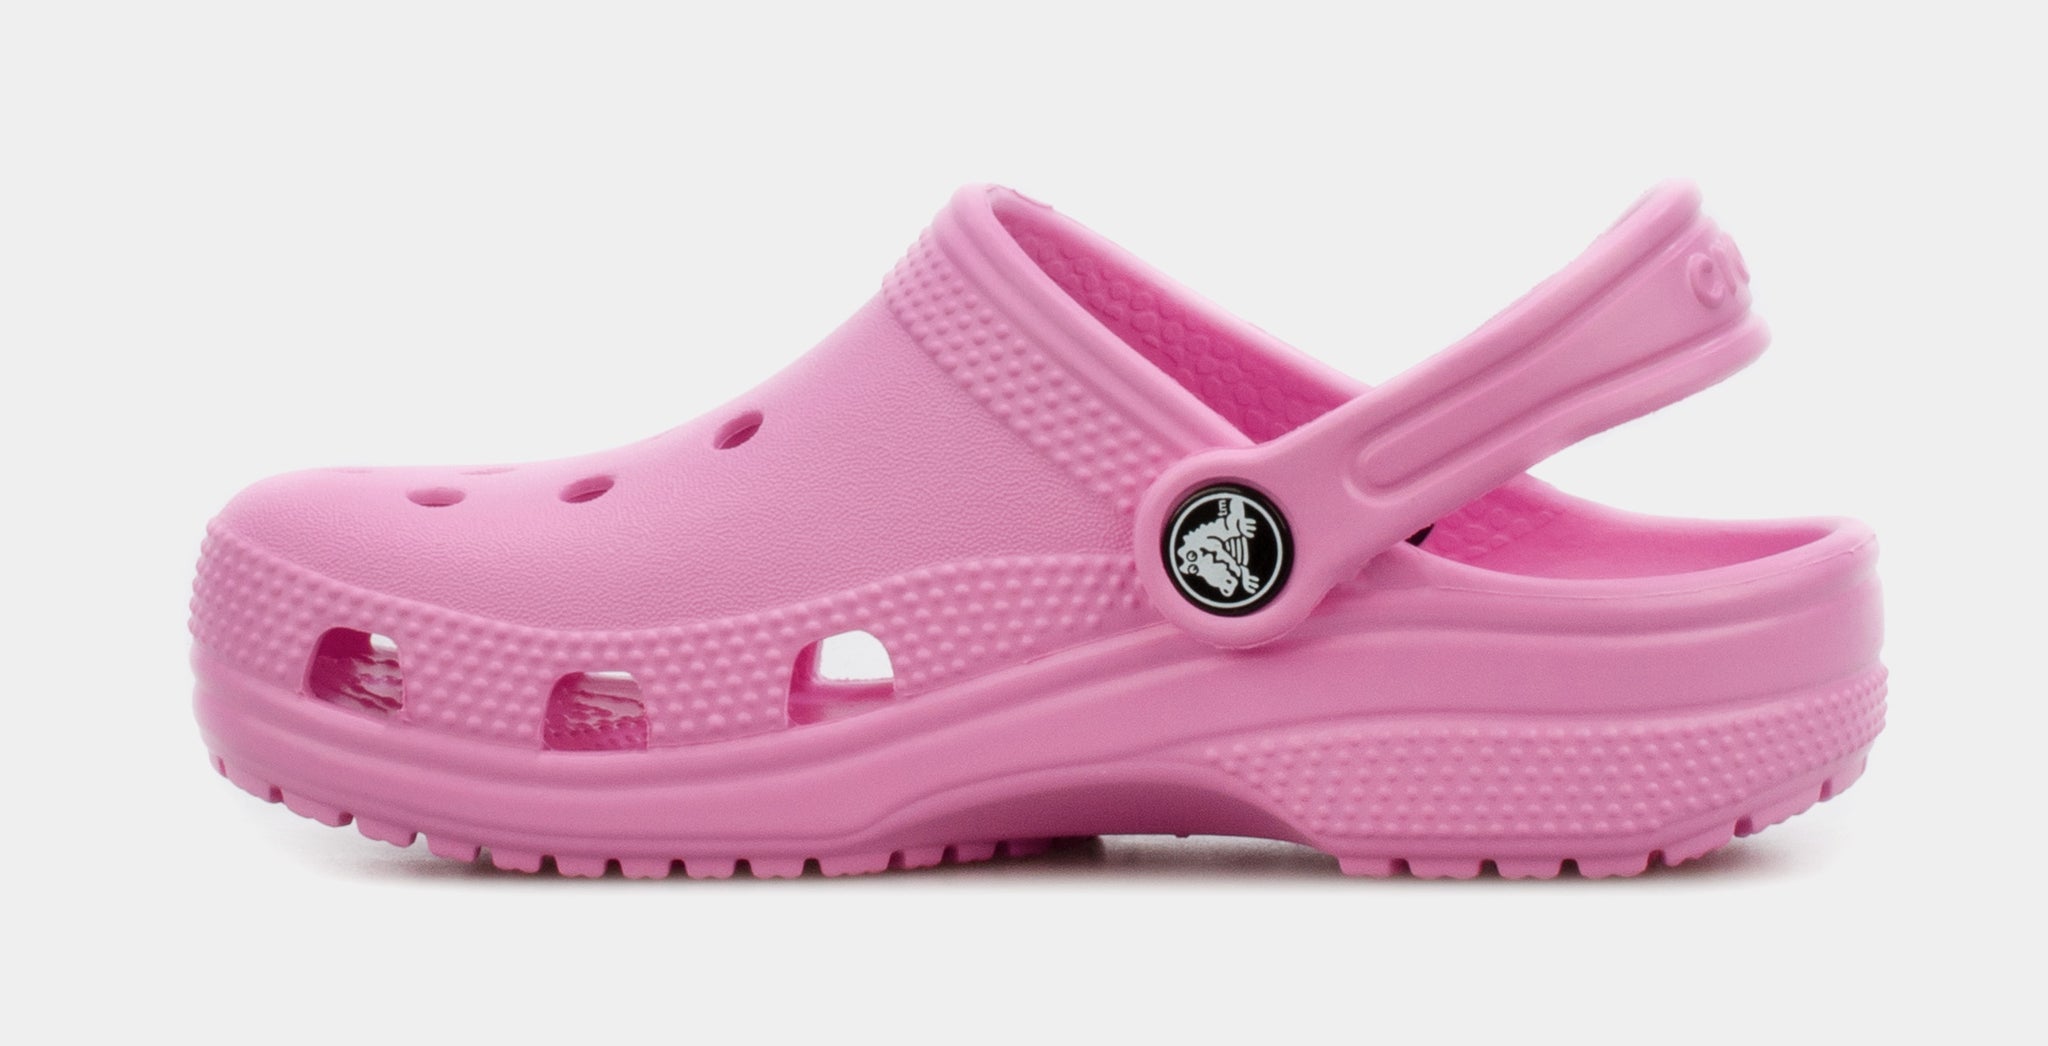 pink crocs with